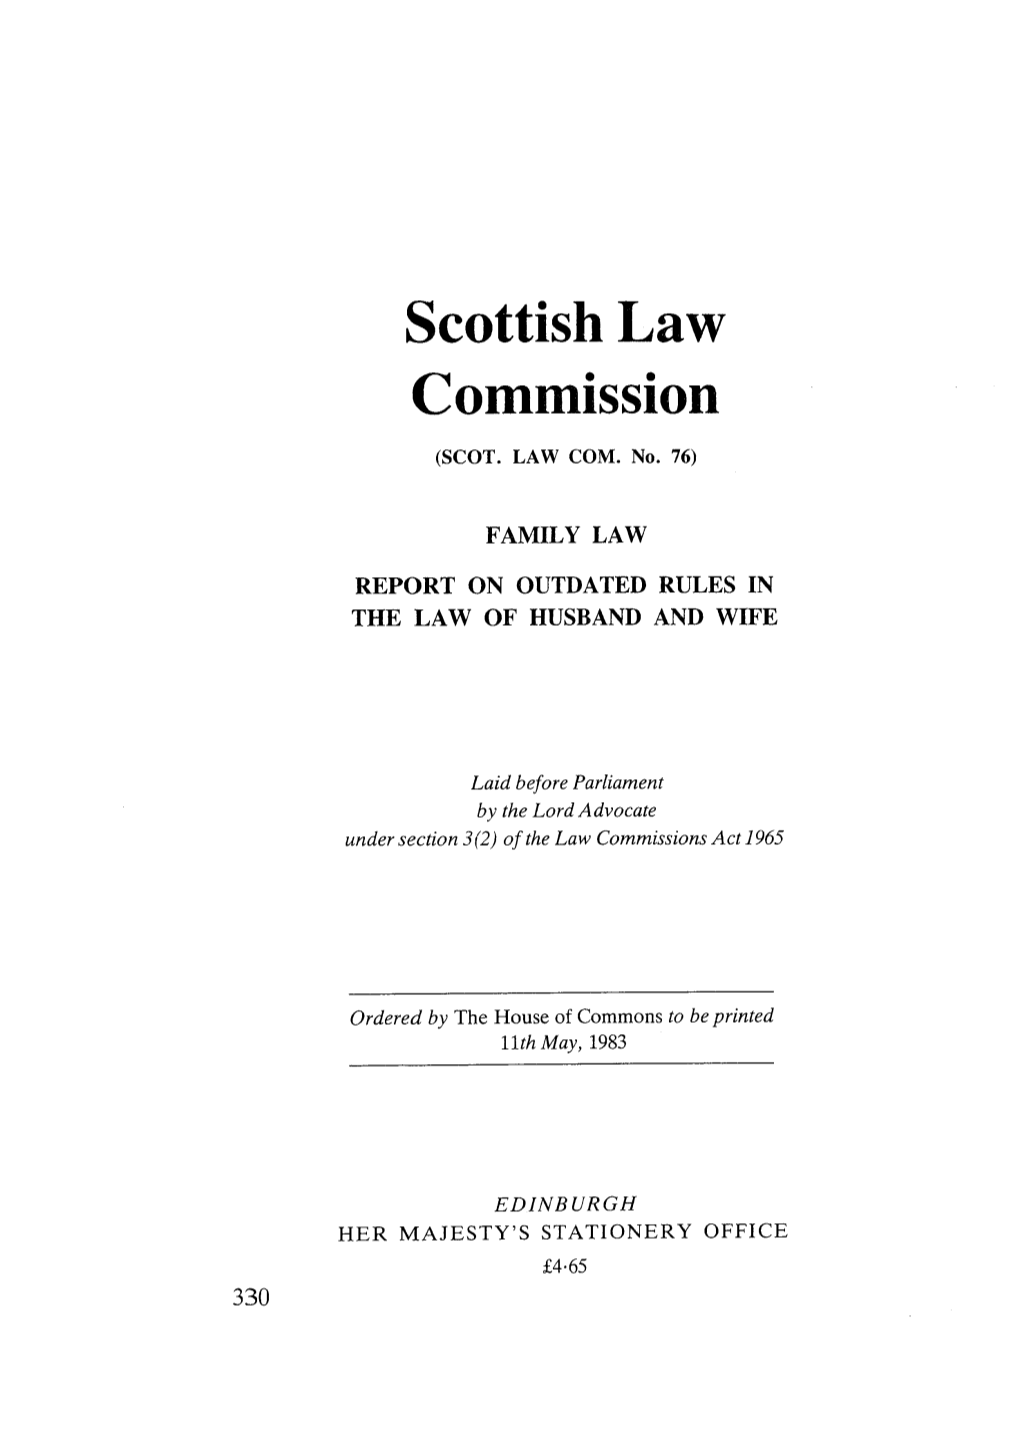 Family Law: Report on Outdated Rules in the Law